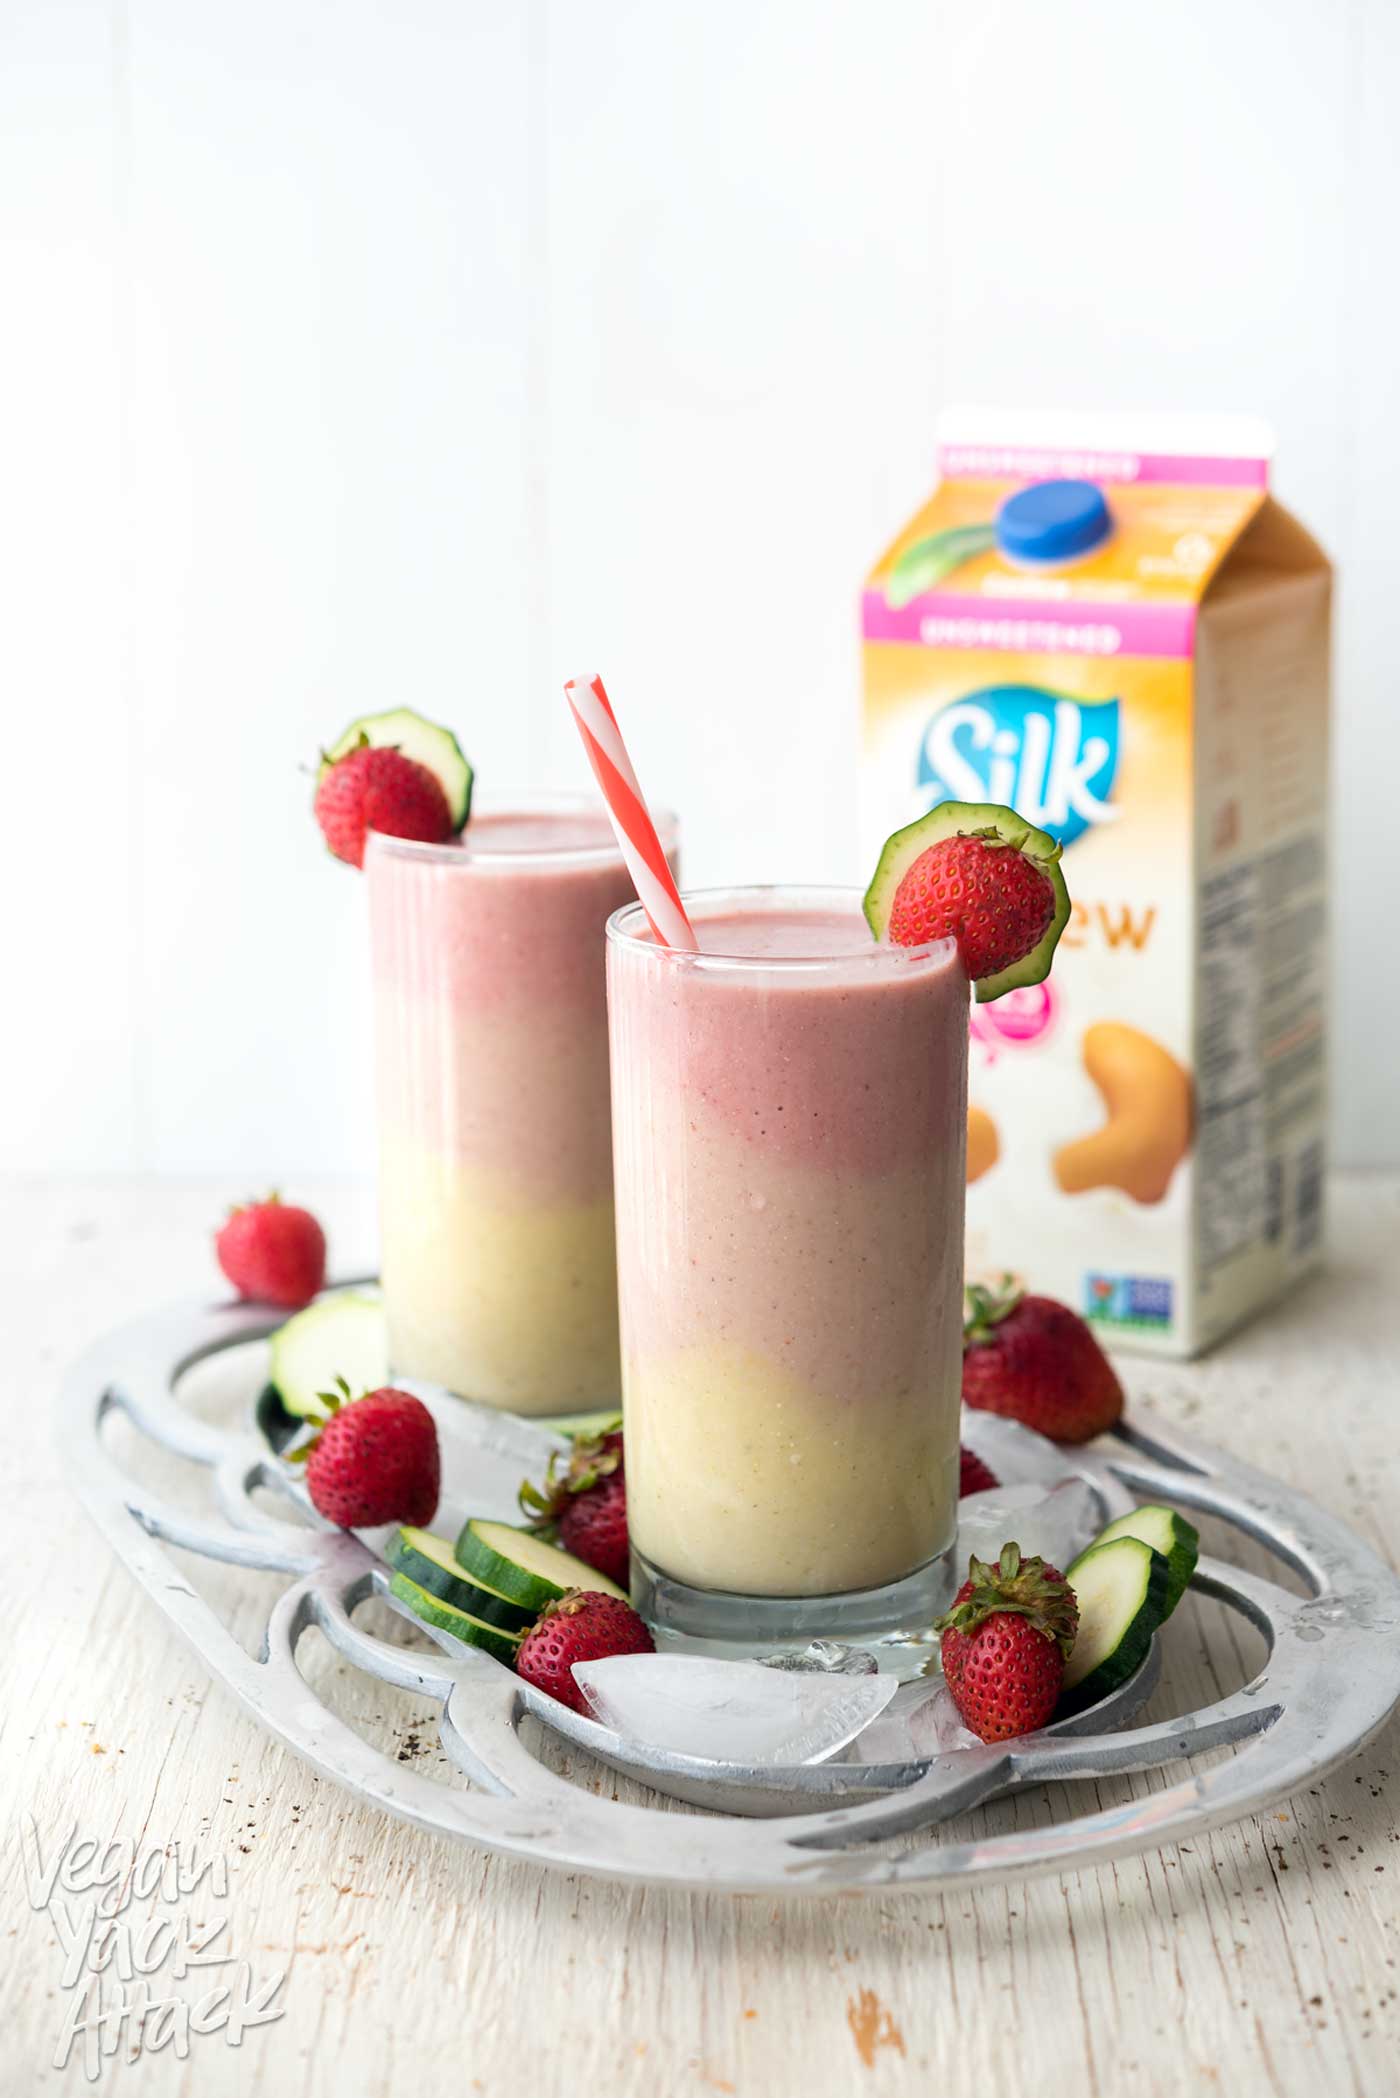 This Strawberry Peach Smoothie has beautiful, creamy layers, with some sneaky ingredients! Perfect for breakfast, or to cool down this summer. #vegan #glutenfree #soyfree #veganyackattack #SilkSmoothies